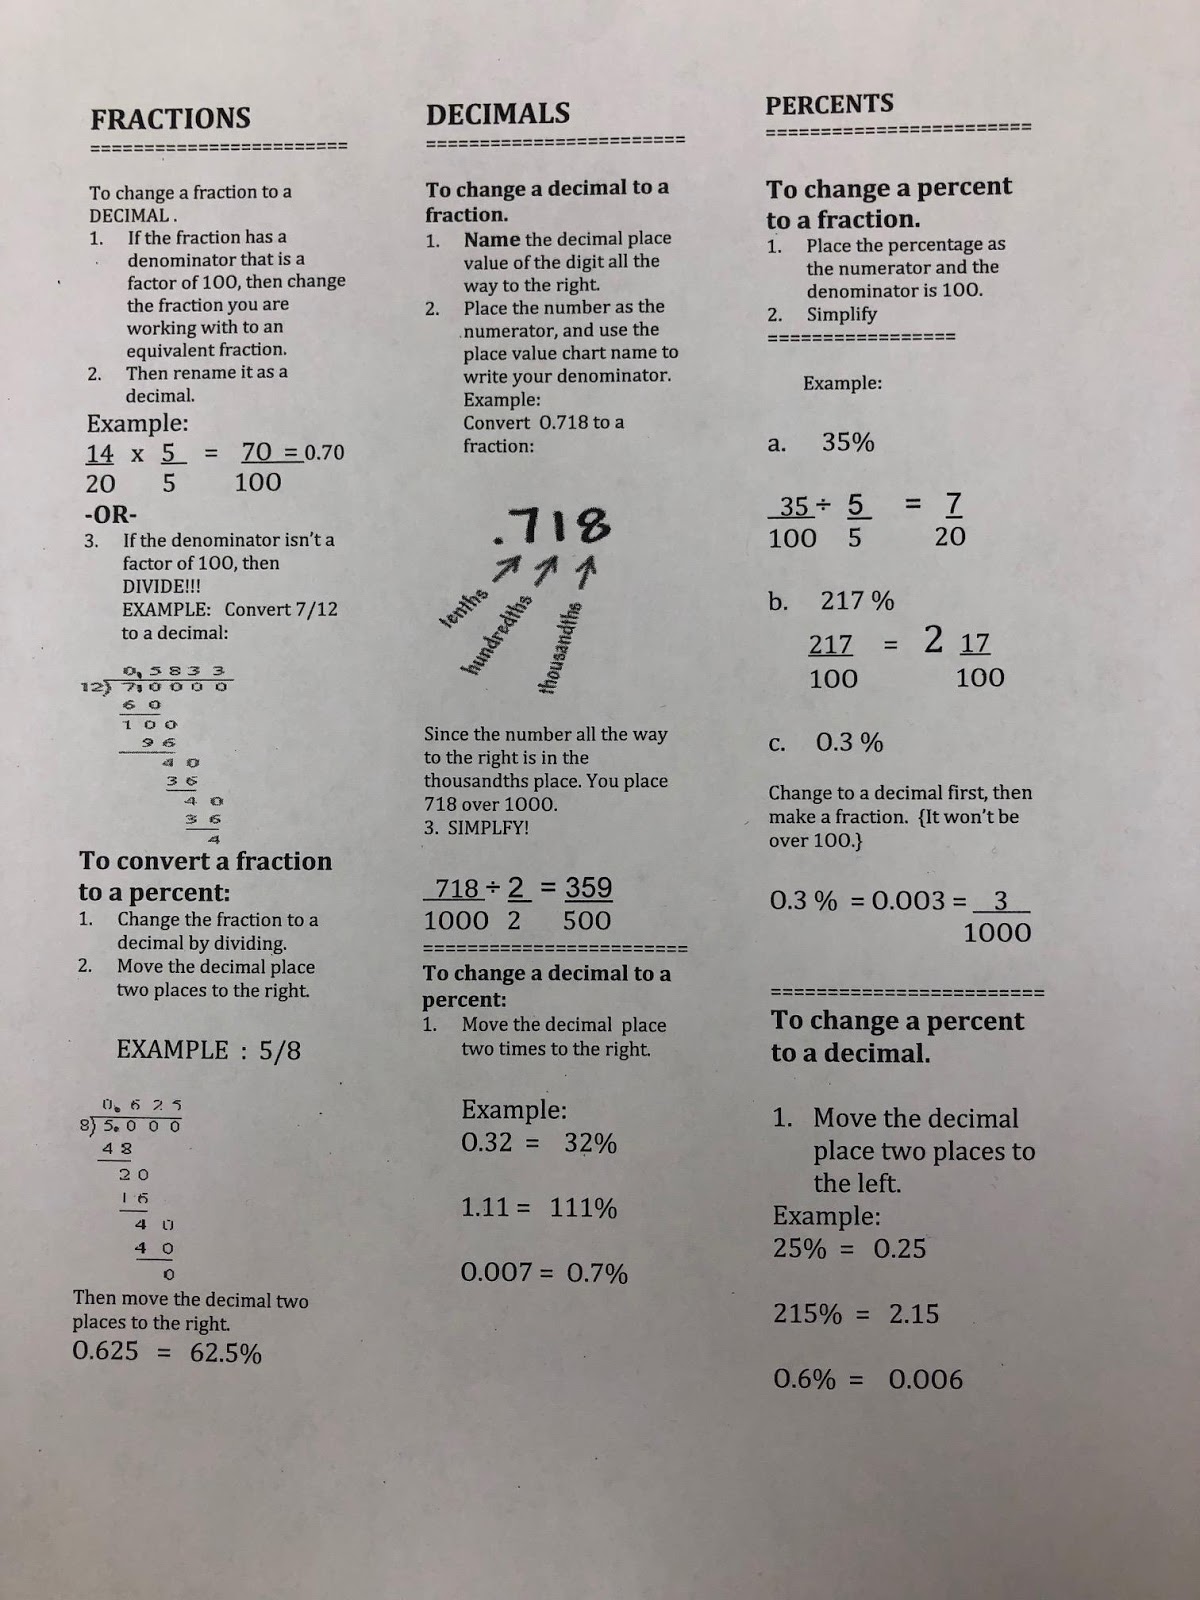 mrs-negron-6th-grade-math-class-lesson-3-1-classifying-rational-numbers